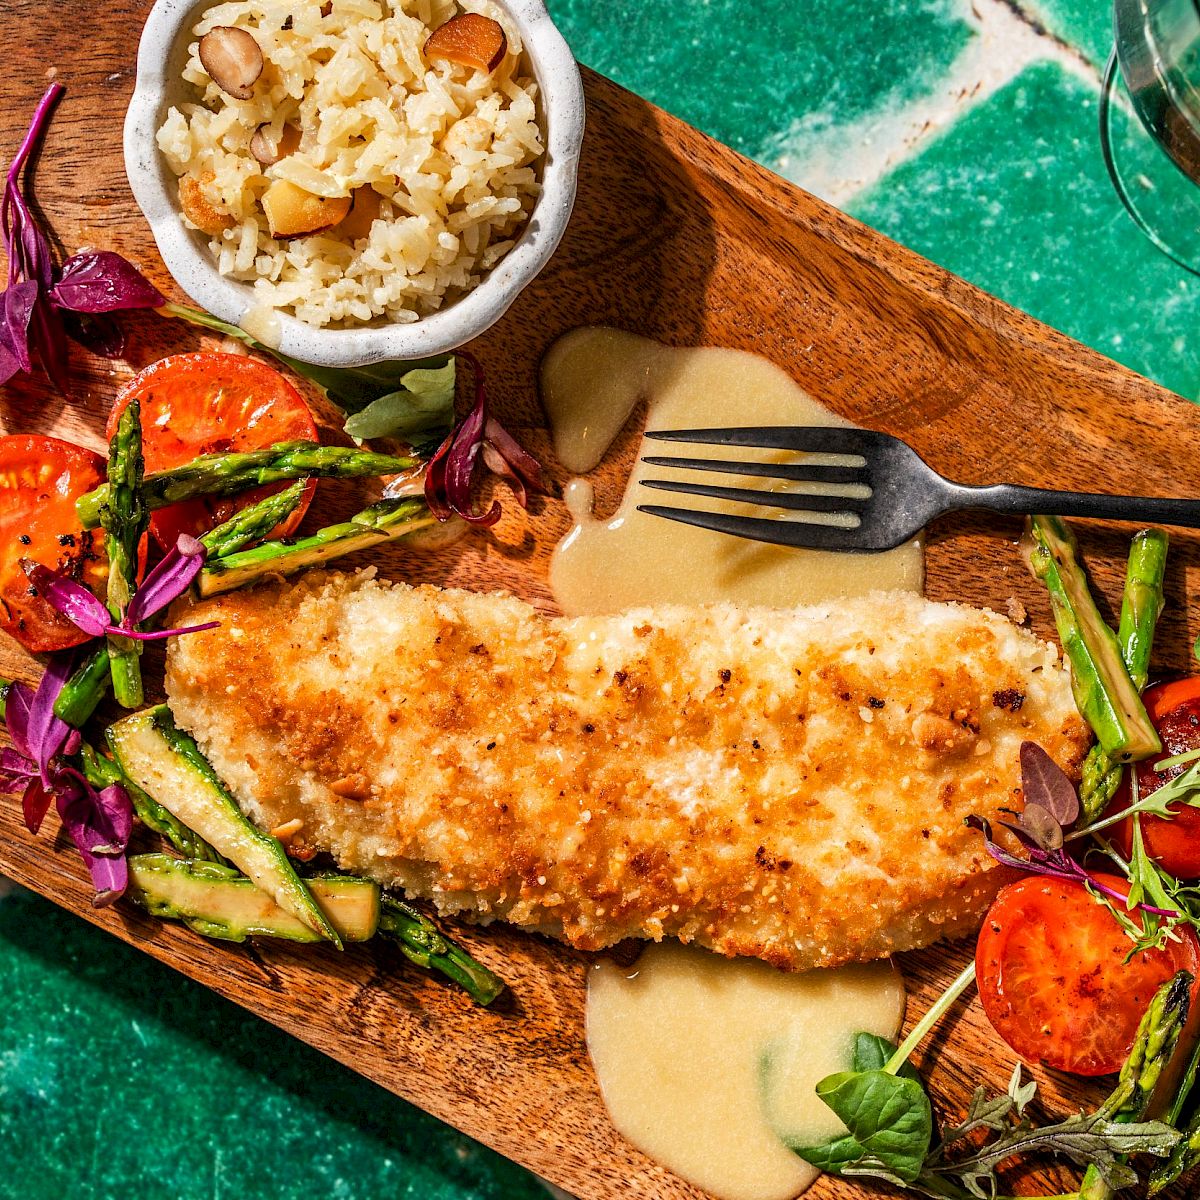 A wooden platter with a breaded fish fillet, assorted vegetables, a small bowl of rice, and a glass of white wine on a green tiled surface.